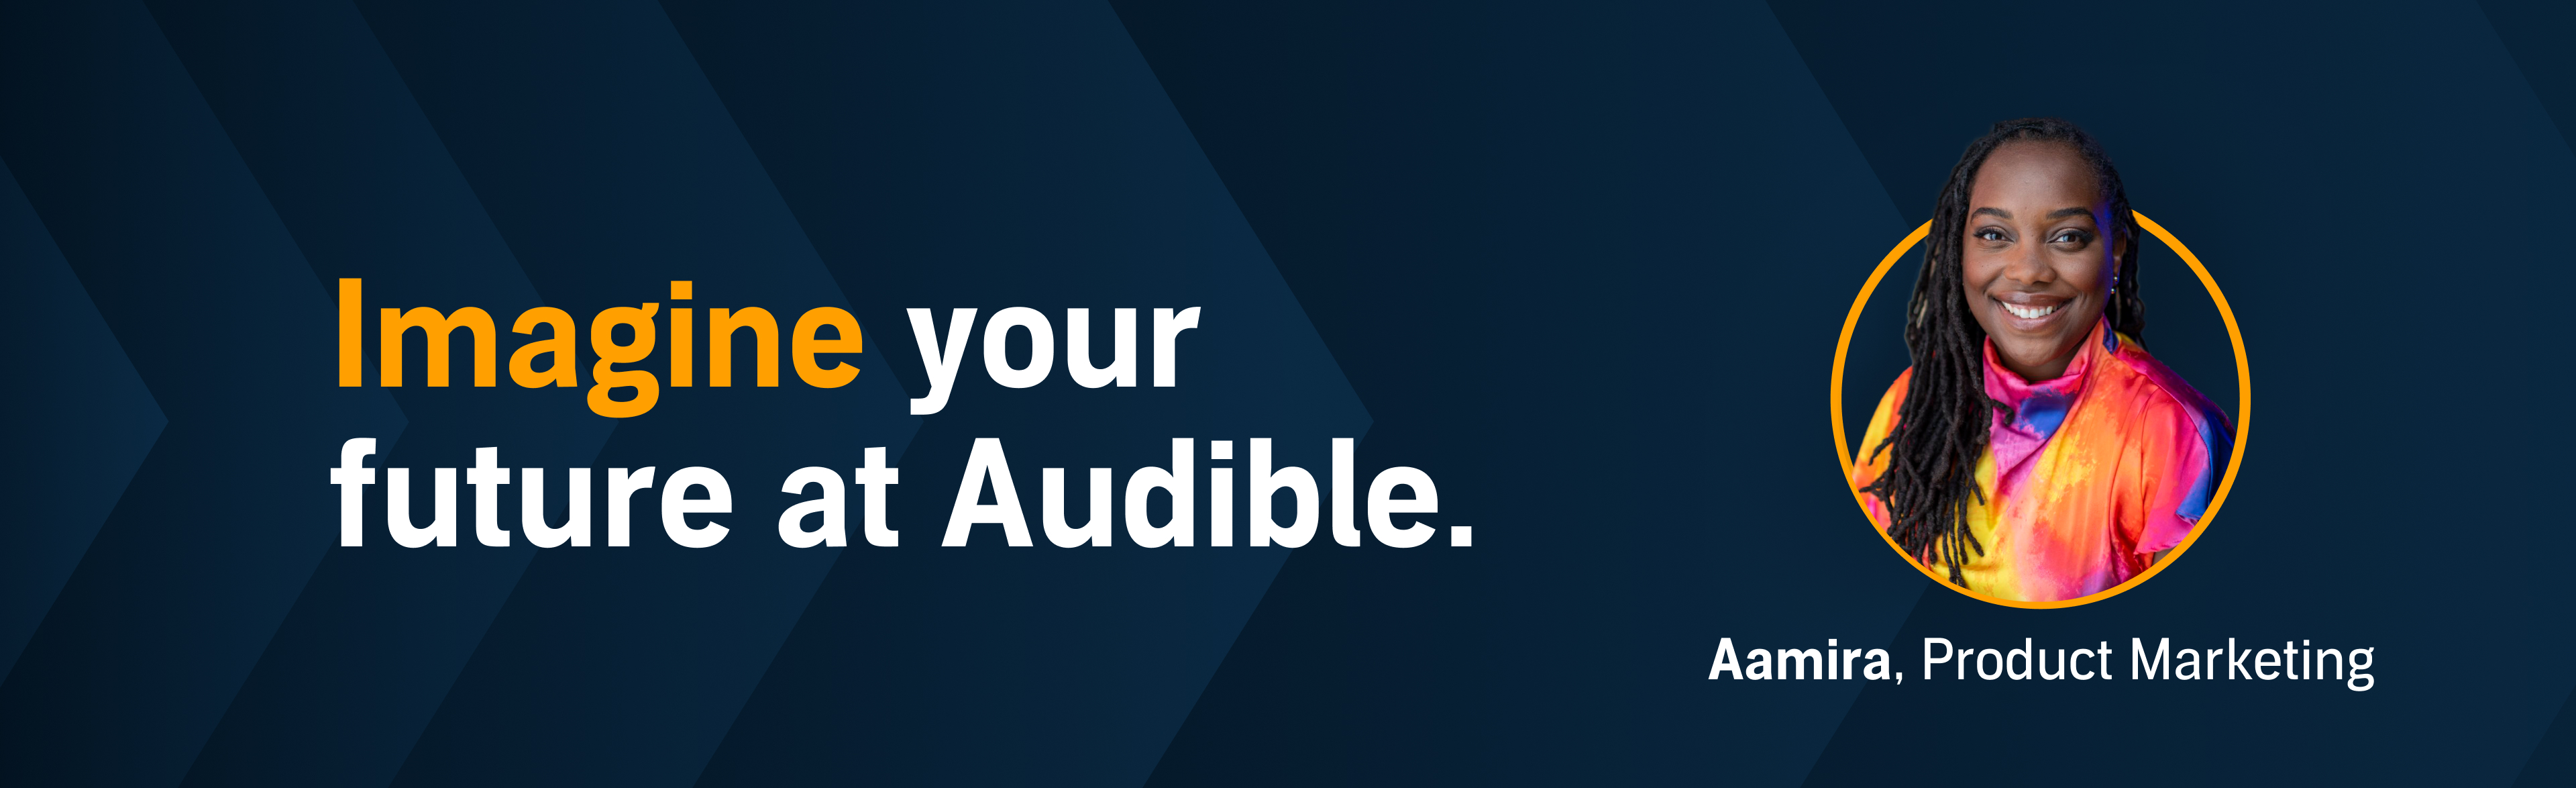 Imagine Your Future at Audible